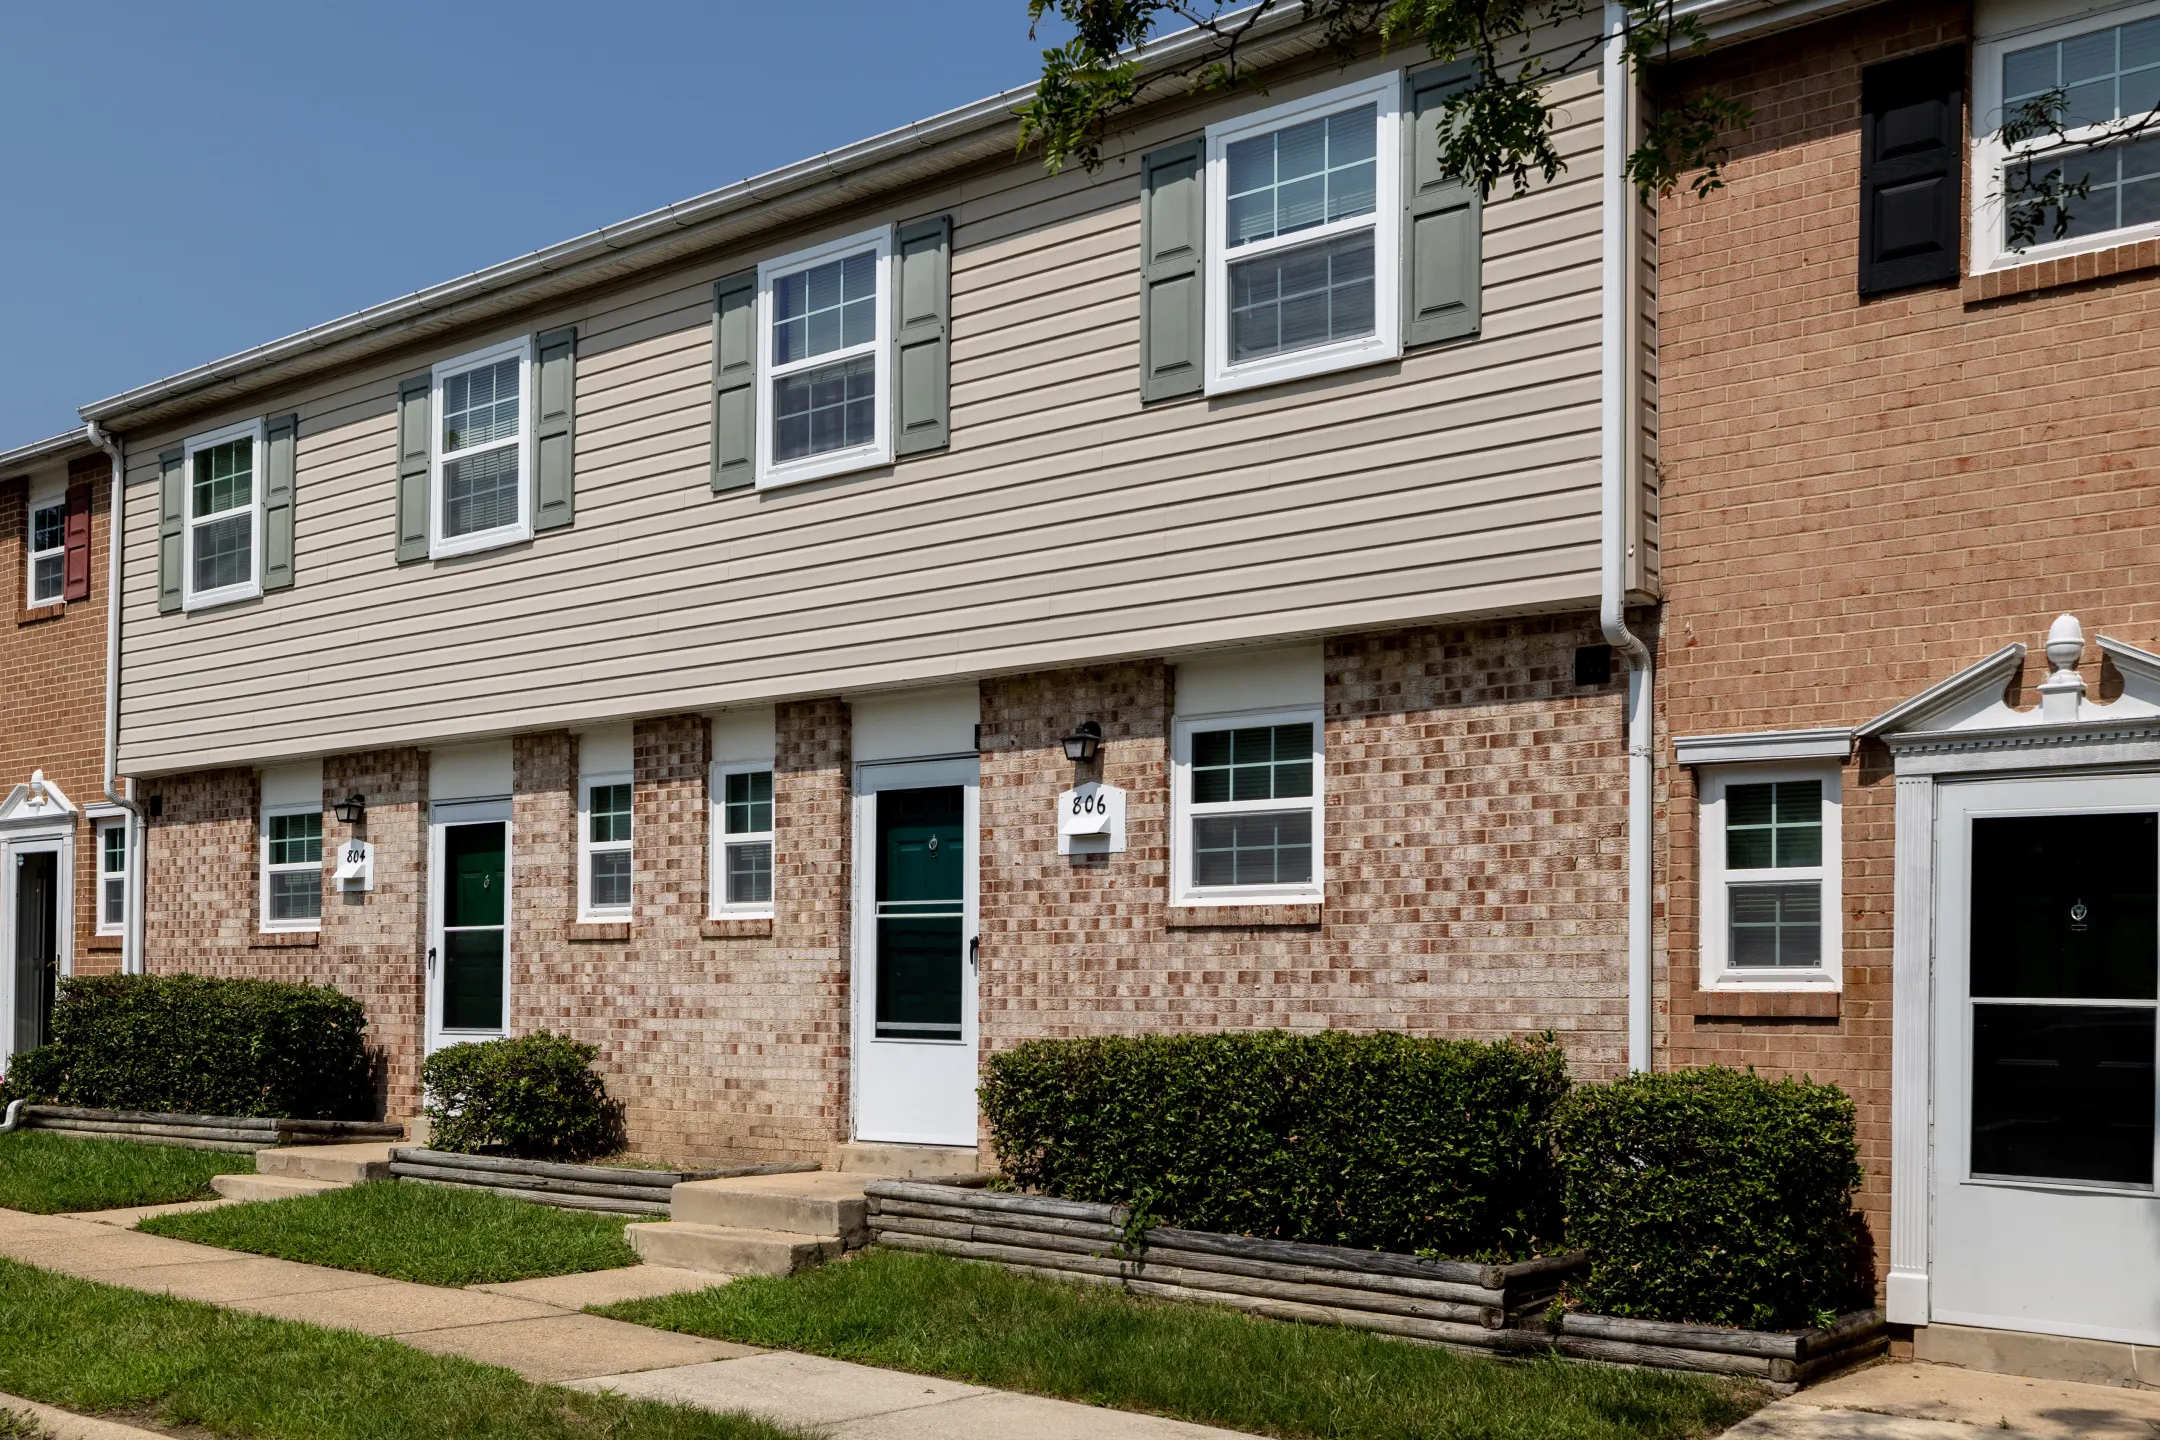 Building - Seven Oaks Townhomes - Edgewood, MD